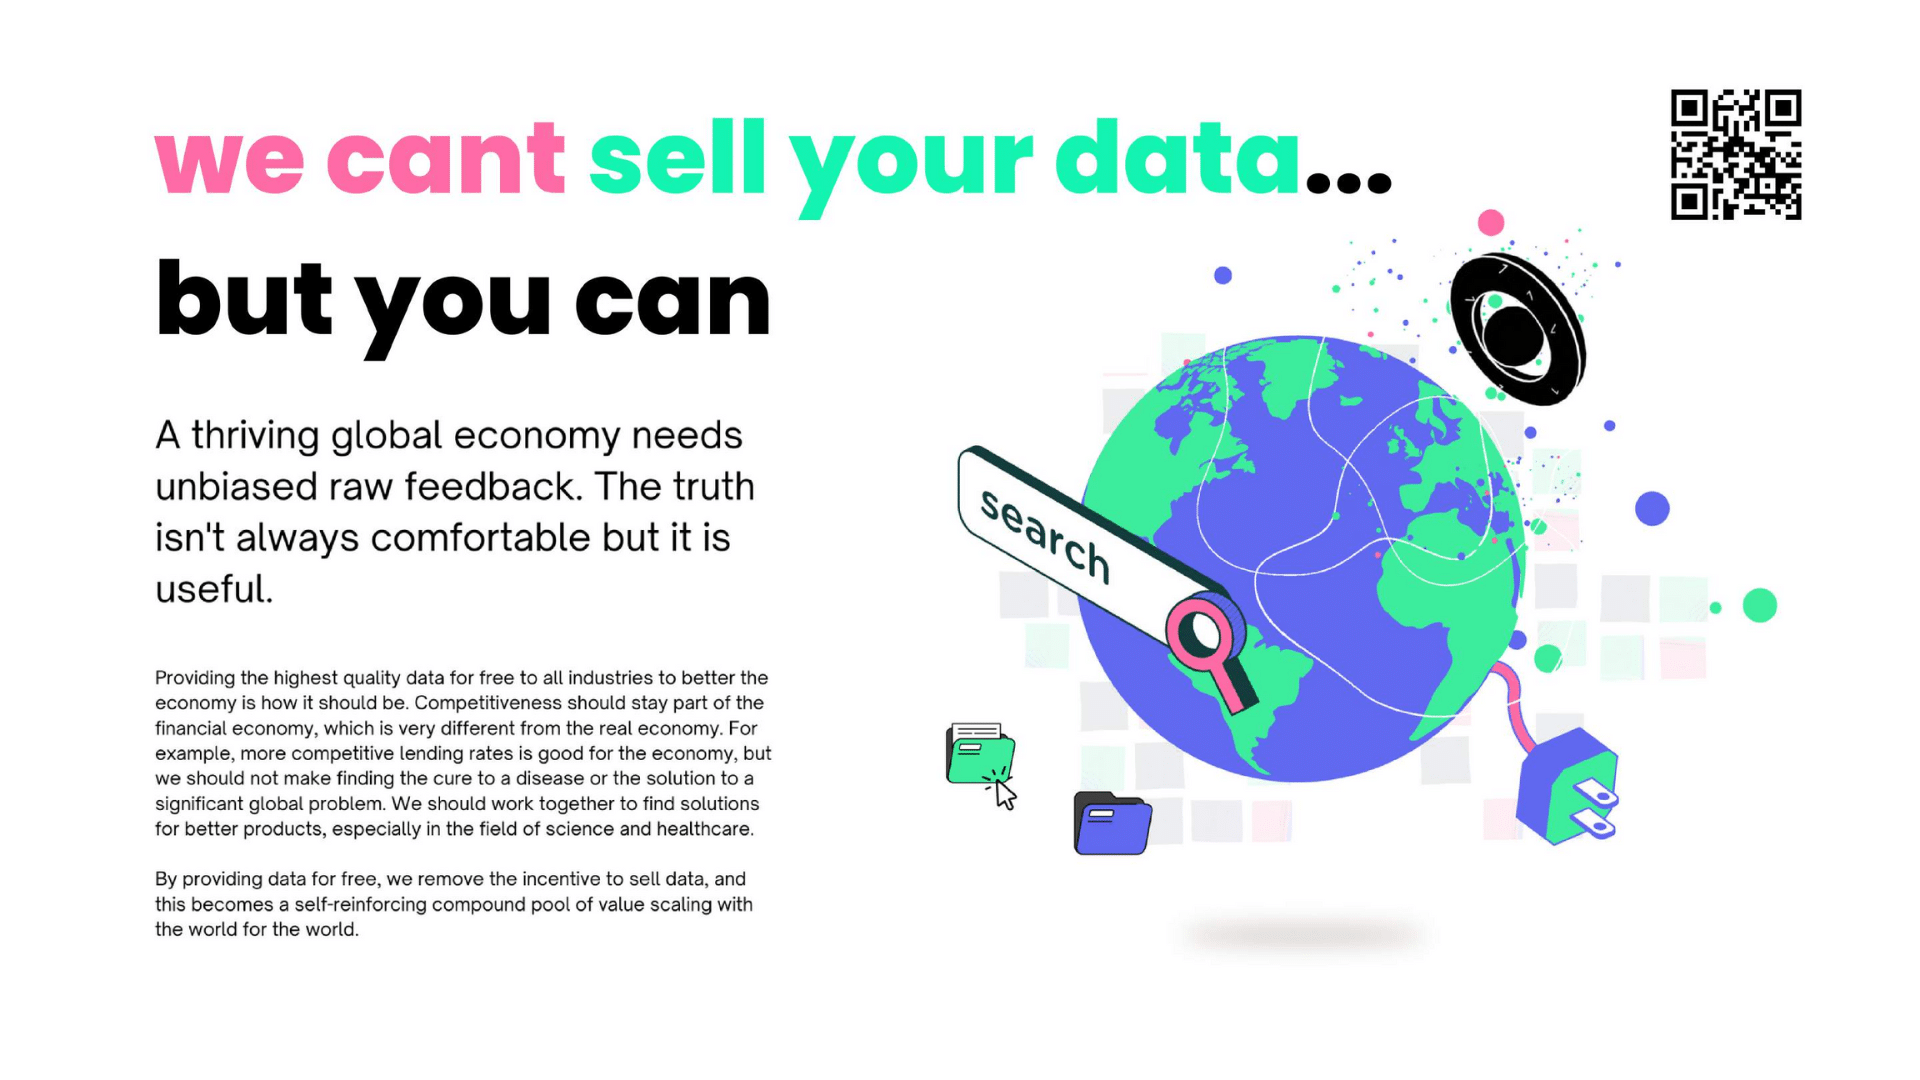 Featured image for “We can’t sell your data… but you can.”